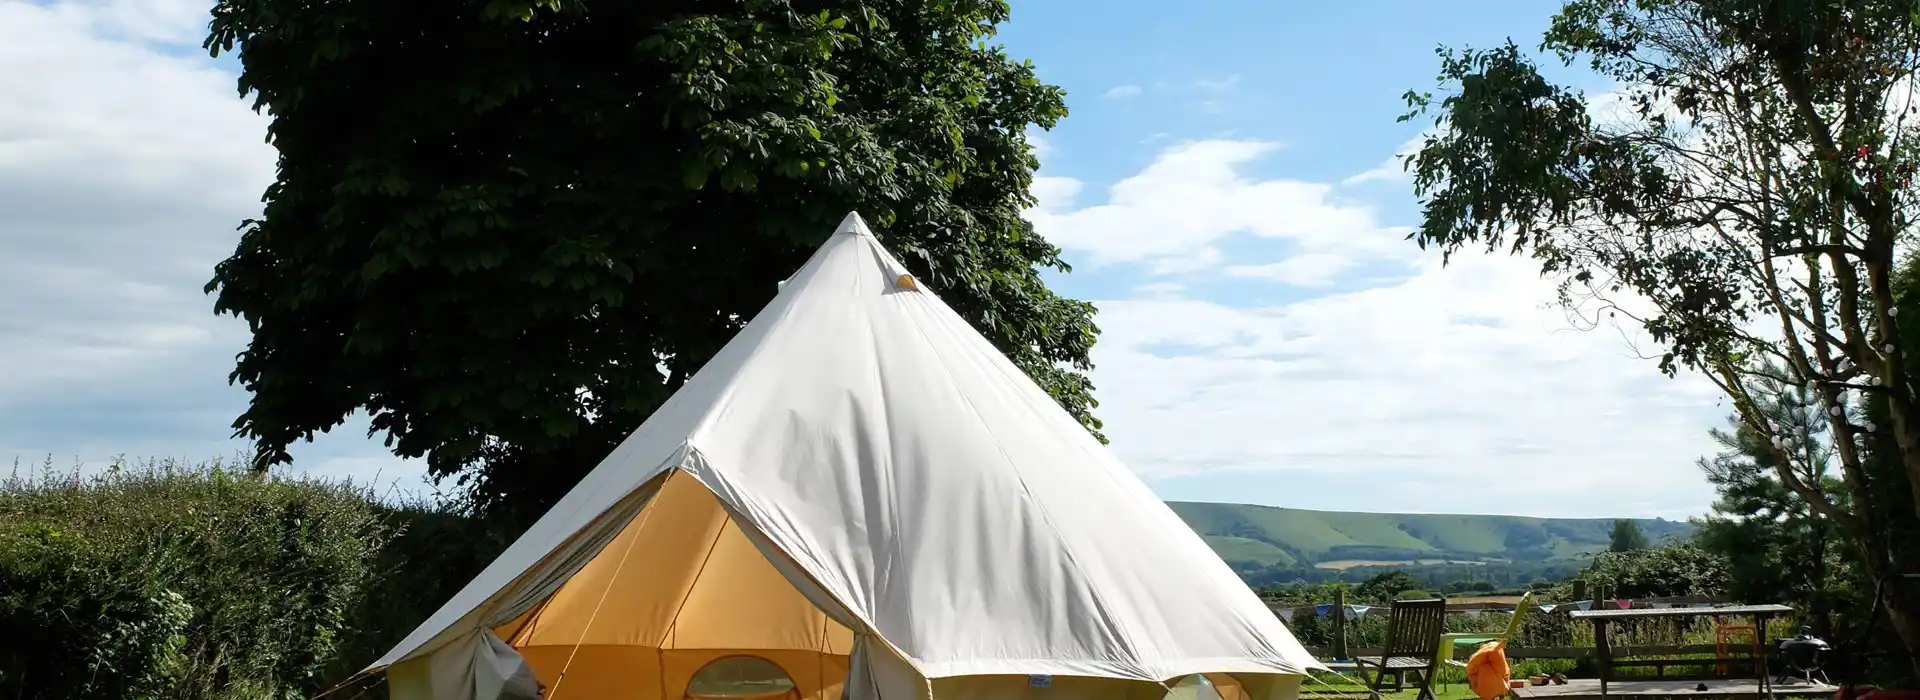 Glamping in Mid Wales